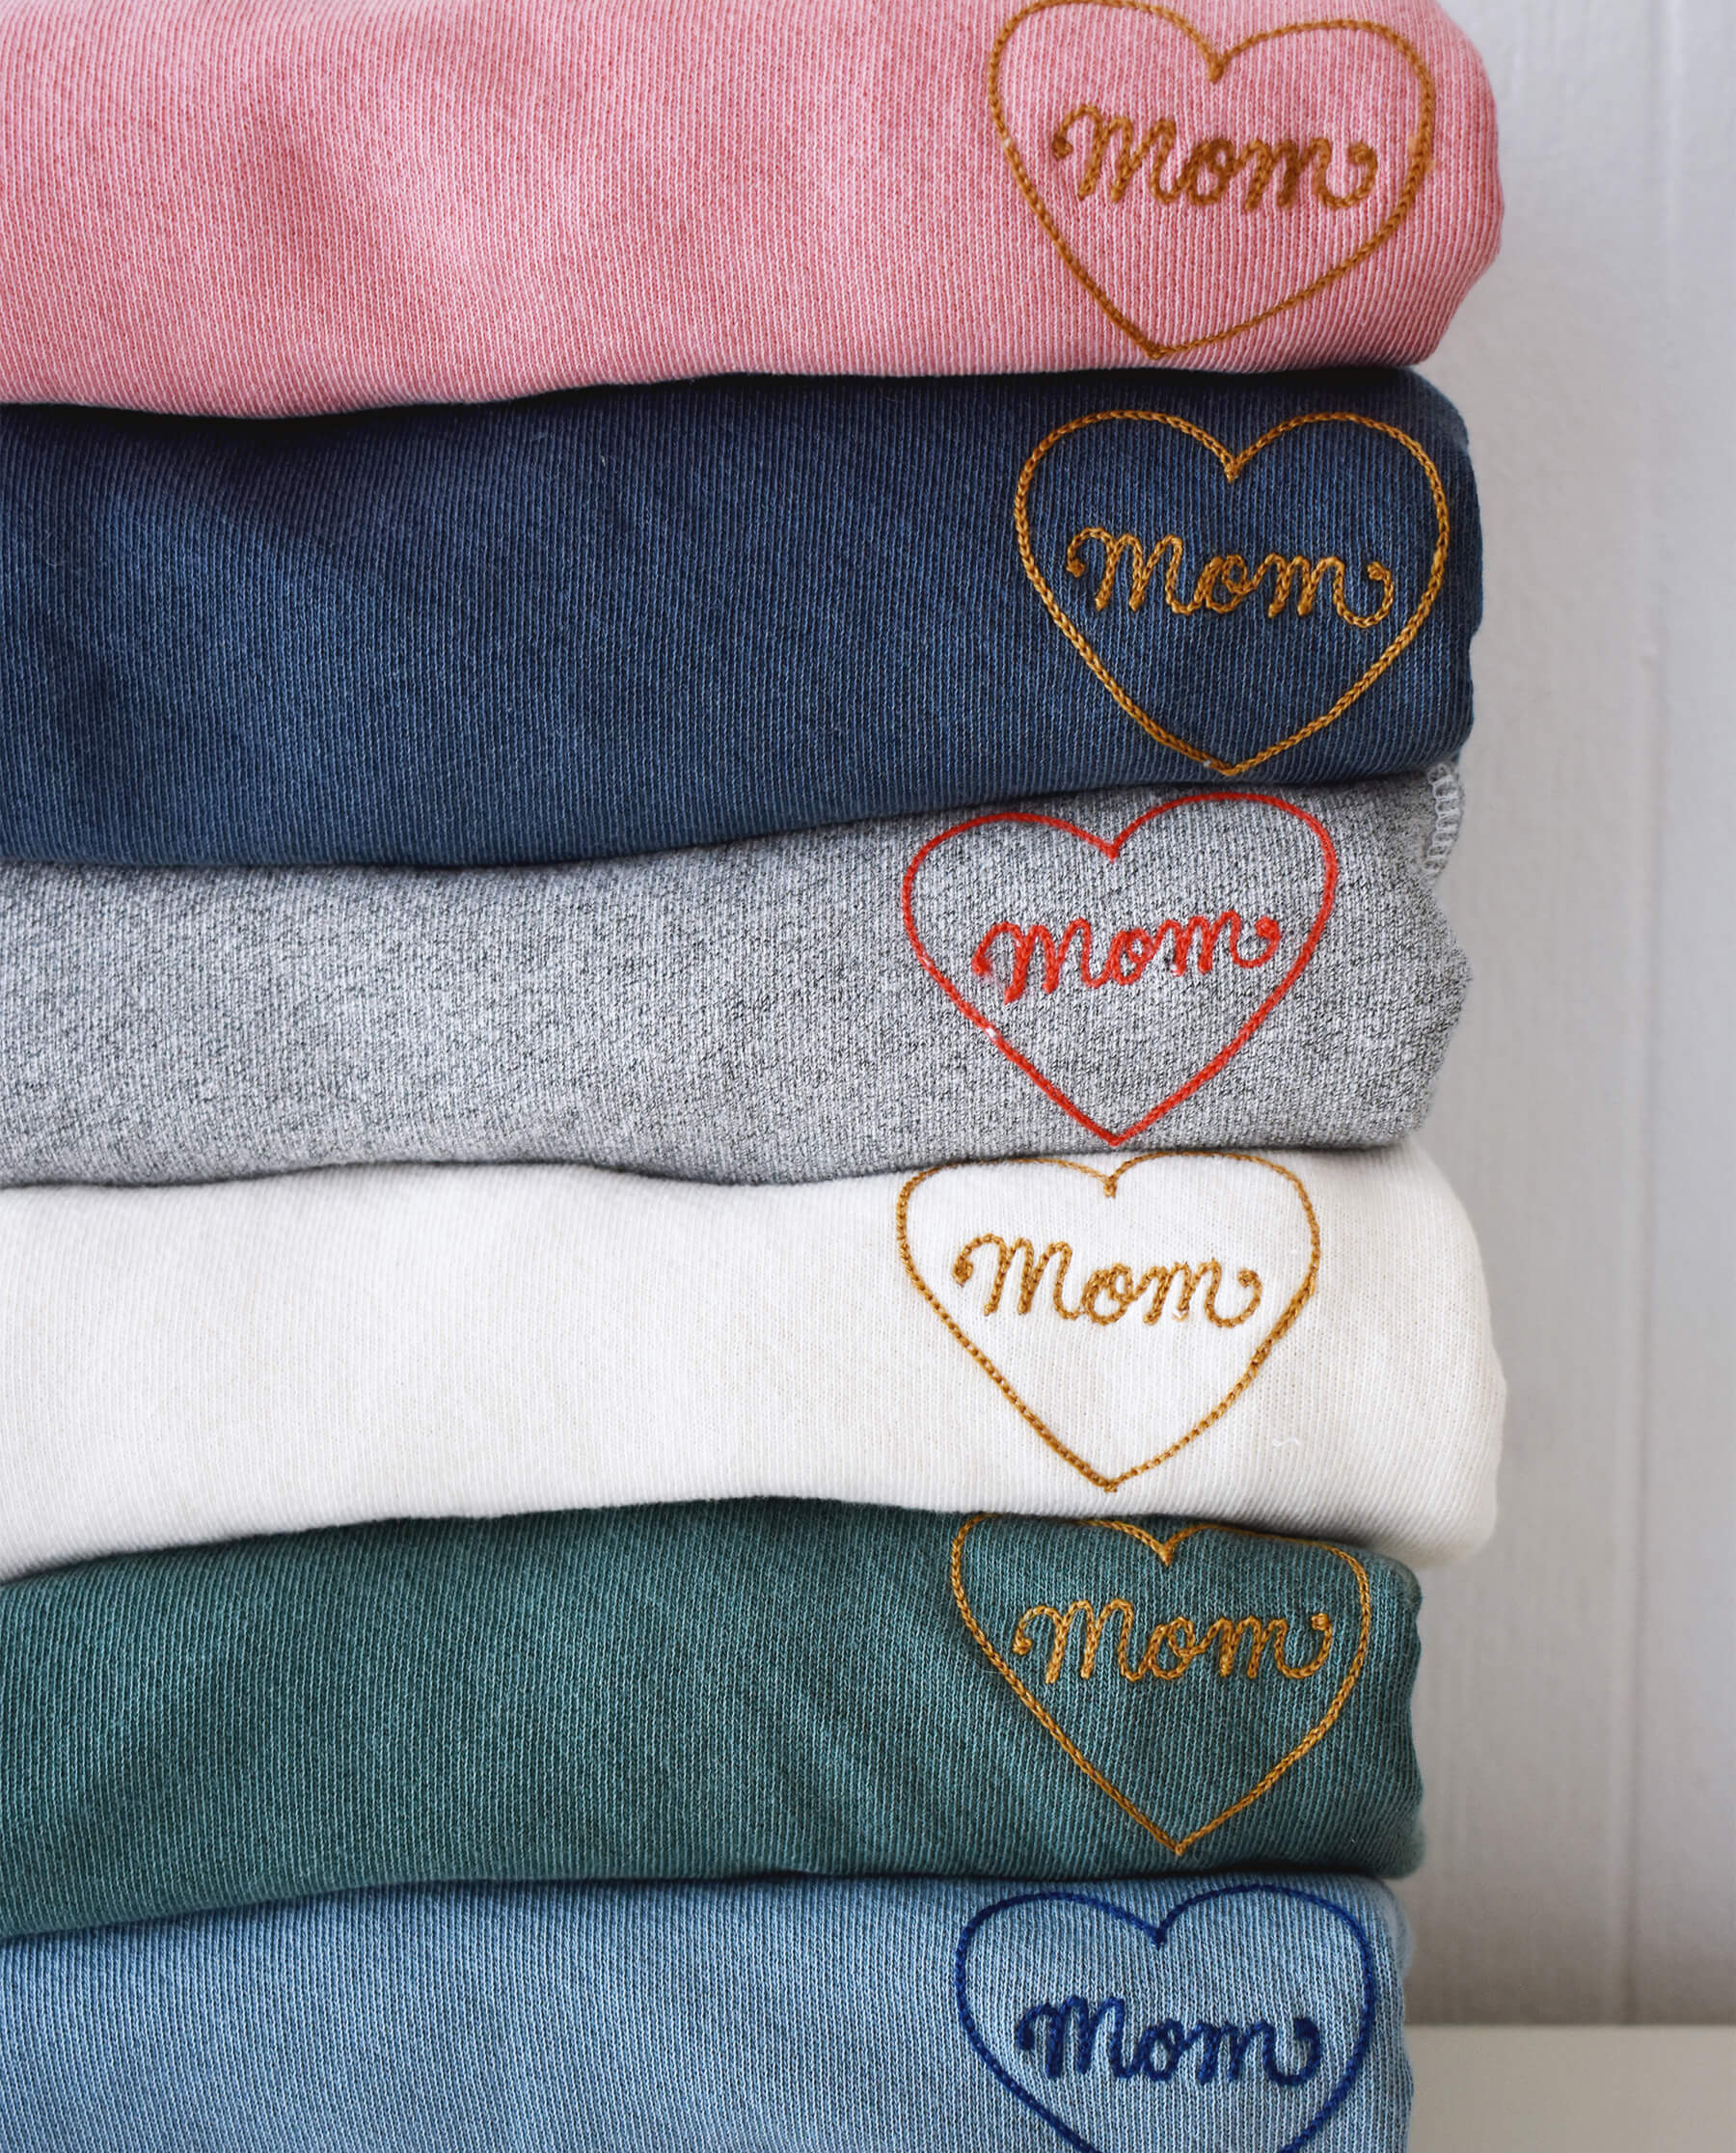 The Mom Embroidered College Sweatshirt. -- Navy with Spice SWEATSHIRTS THE GREAT. SP23 MOM